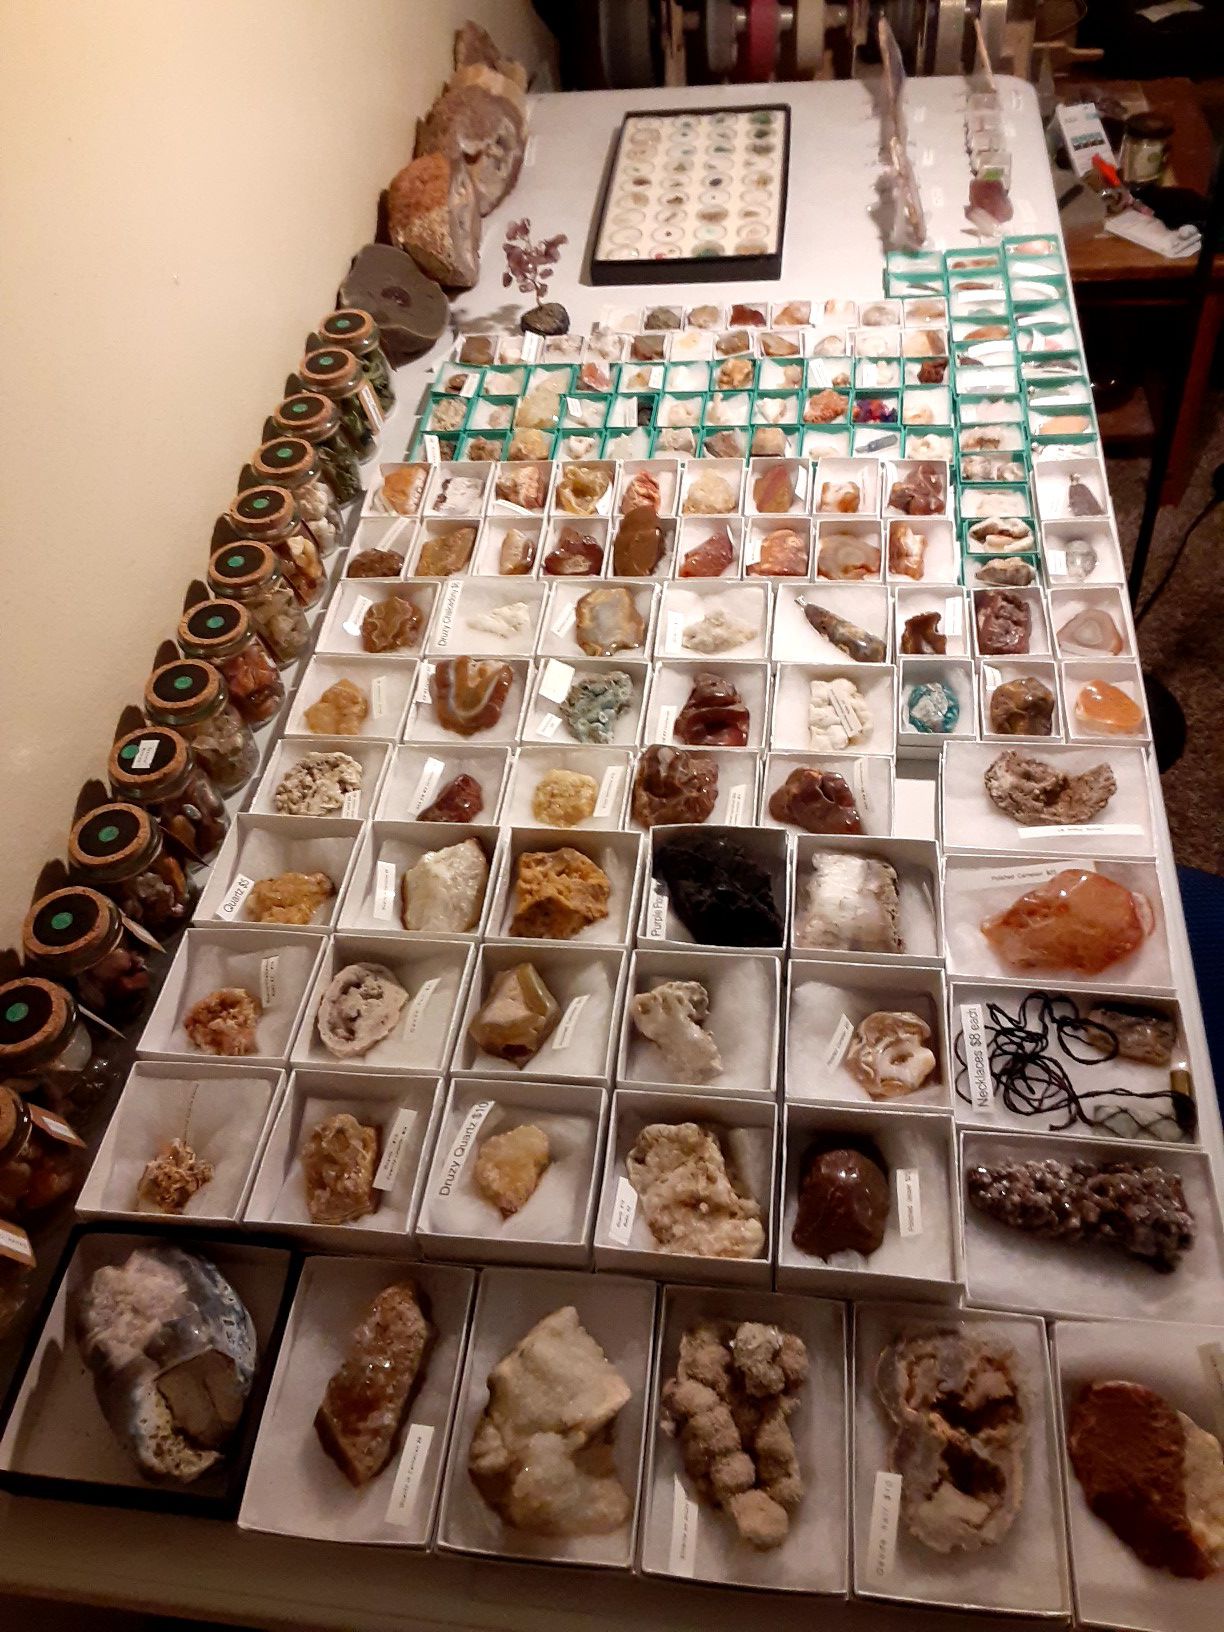 Gemstones, Crystals, jewelry and more.